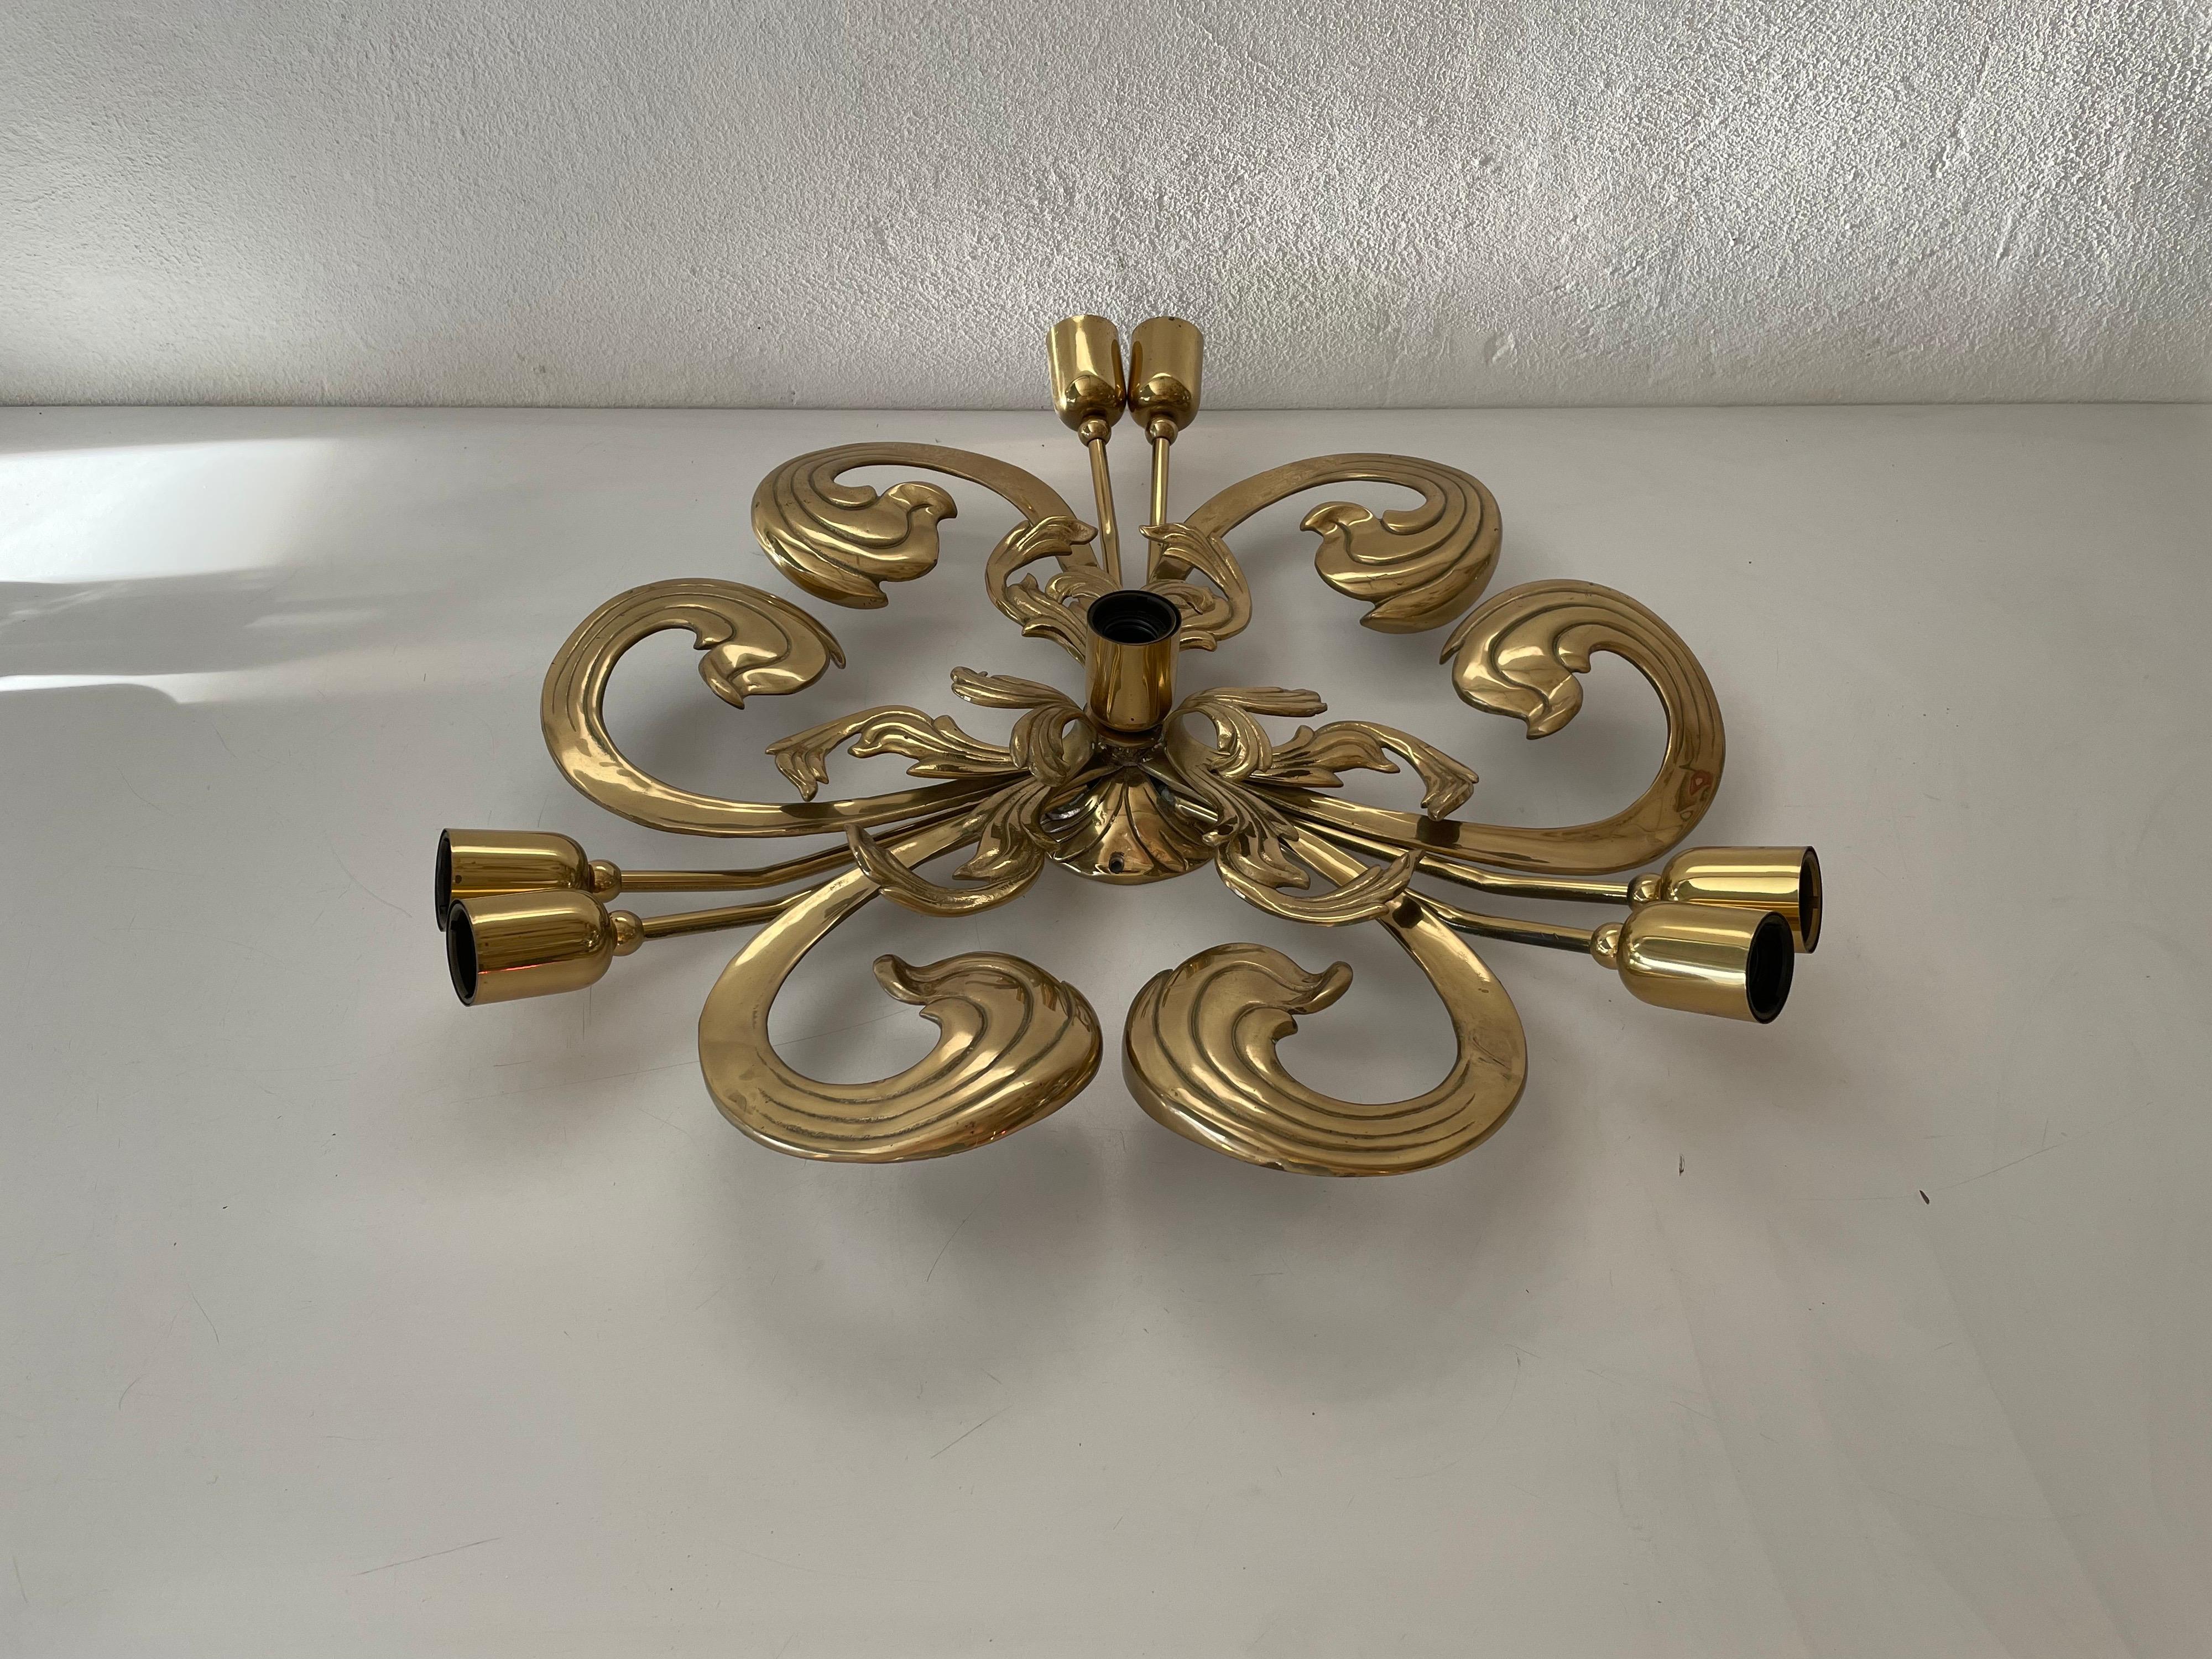 Wonderful 7 socket flower shaped full brass XL chandelier by Hans Möller, 1960s, Germany

Sculptural very elegant rare heavy ceiling lamp. 

It is very ideal and suitable for all living areas.

Lamp is in good condition. No damage, no